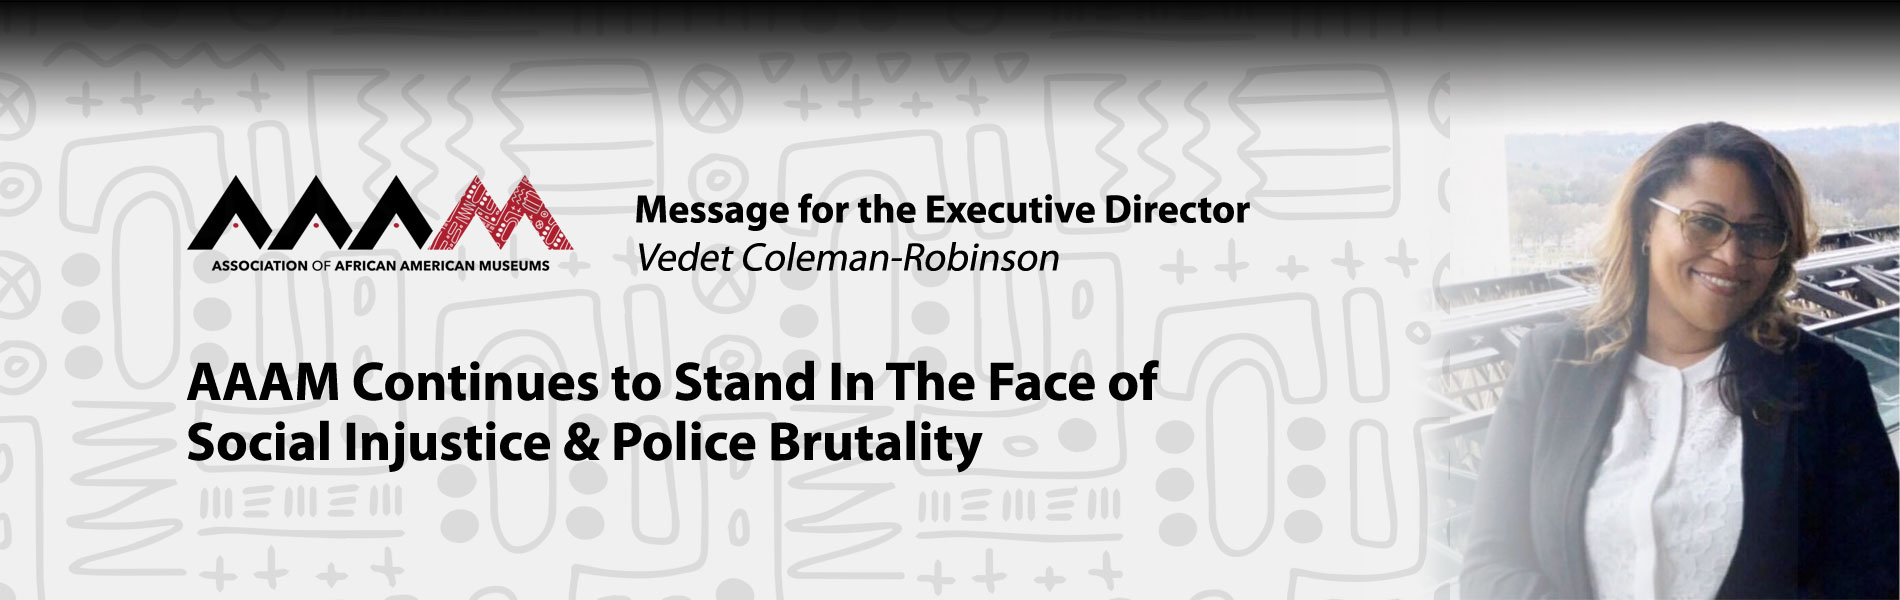 AAAM Continues to Stand In The Face of Social Injustice & Police Brutality